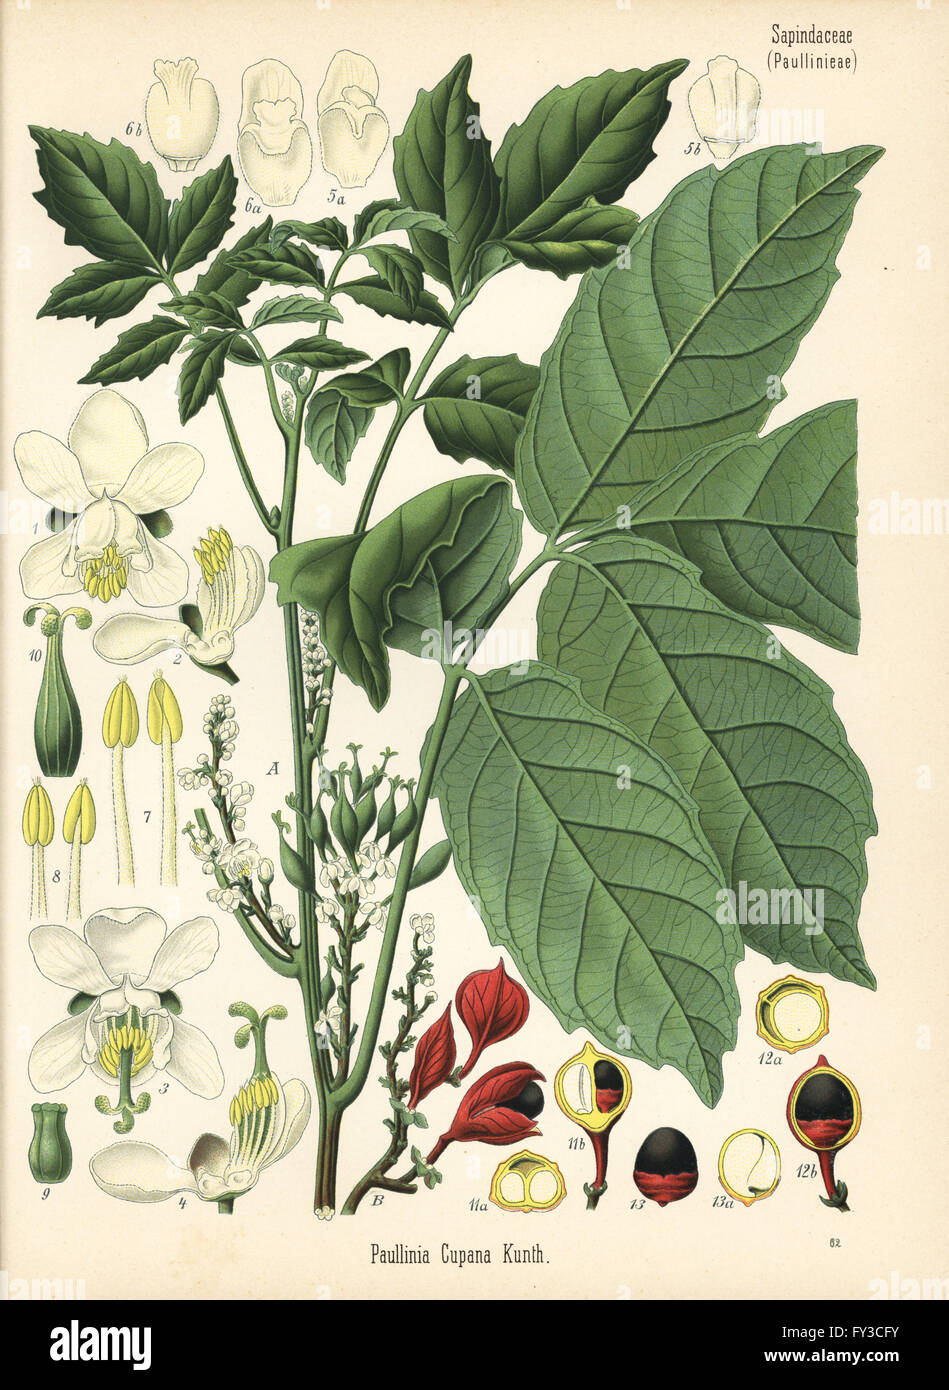 Guarana, Paullinia cupana. Chromolithograph after a botanical illustration from Hermann Adolph Koehler's Medicinal Plants, edited by Gustav Pabst, Koehler, Germany, 1887. Stock Photo